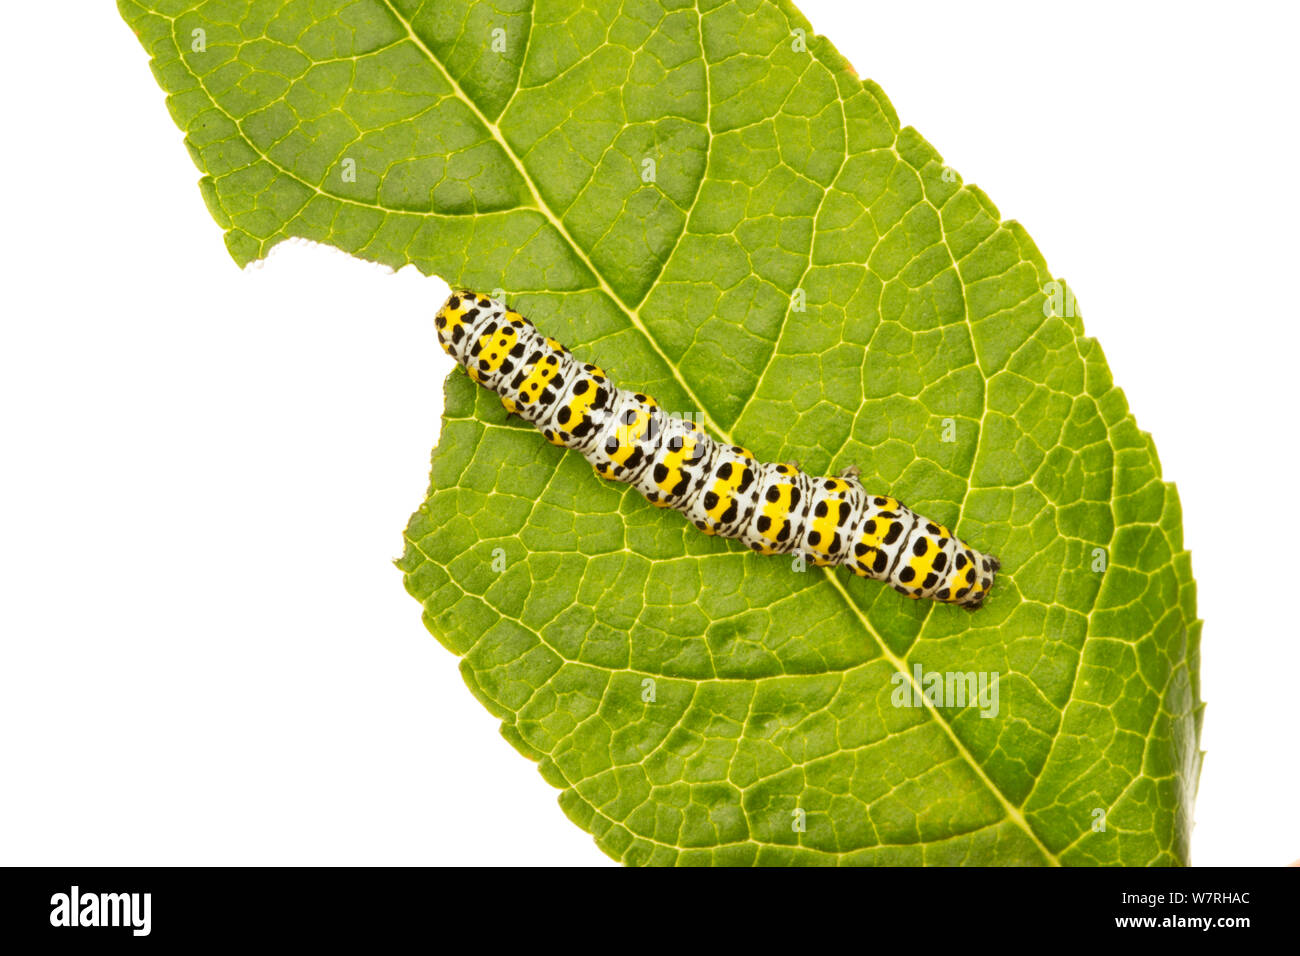 Mullein moth (Cucullia verbasci) caterpillar feeding on a Buddleia leaf, Leicestershire, England, UK, June. meetyourneighbours.net project Stock Photo